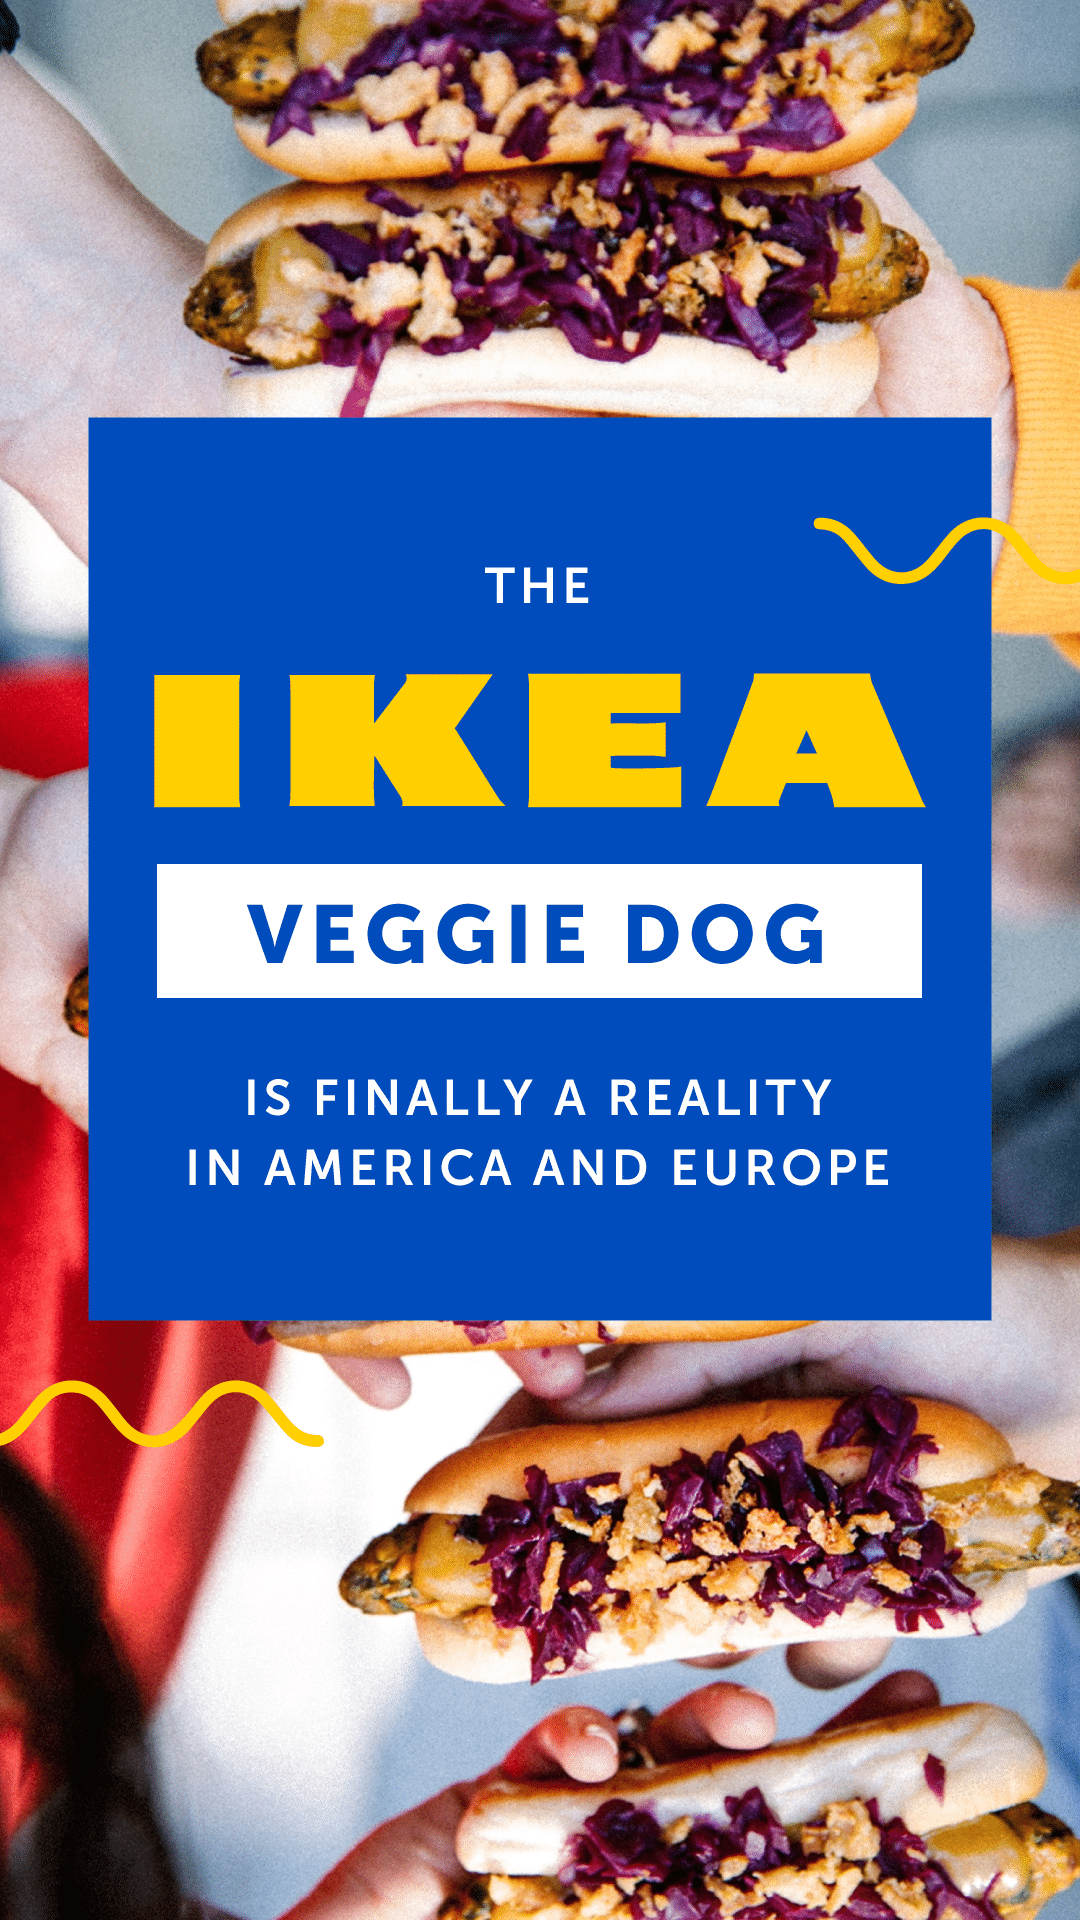 The IKEA Veggie Dog Is Finally a Reality in America and Europe